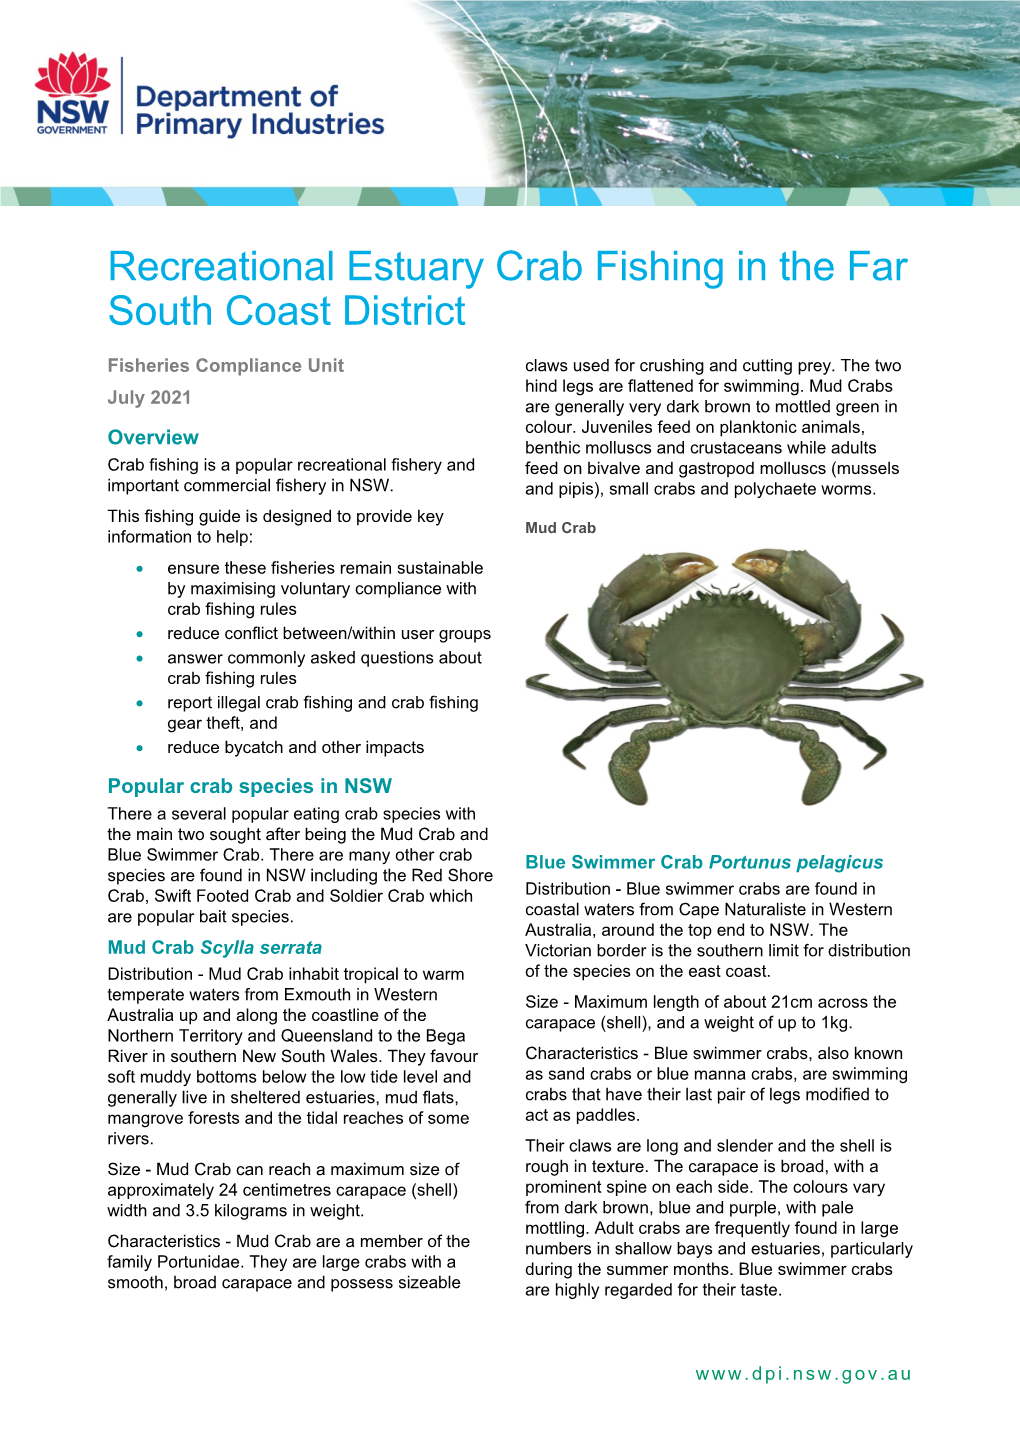 Recreational Estuary Crab Fishing in the Far South Coast District